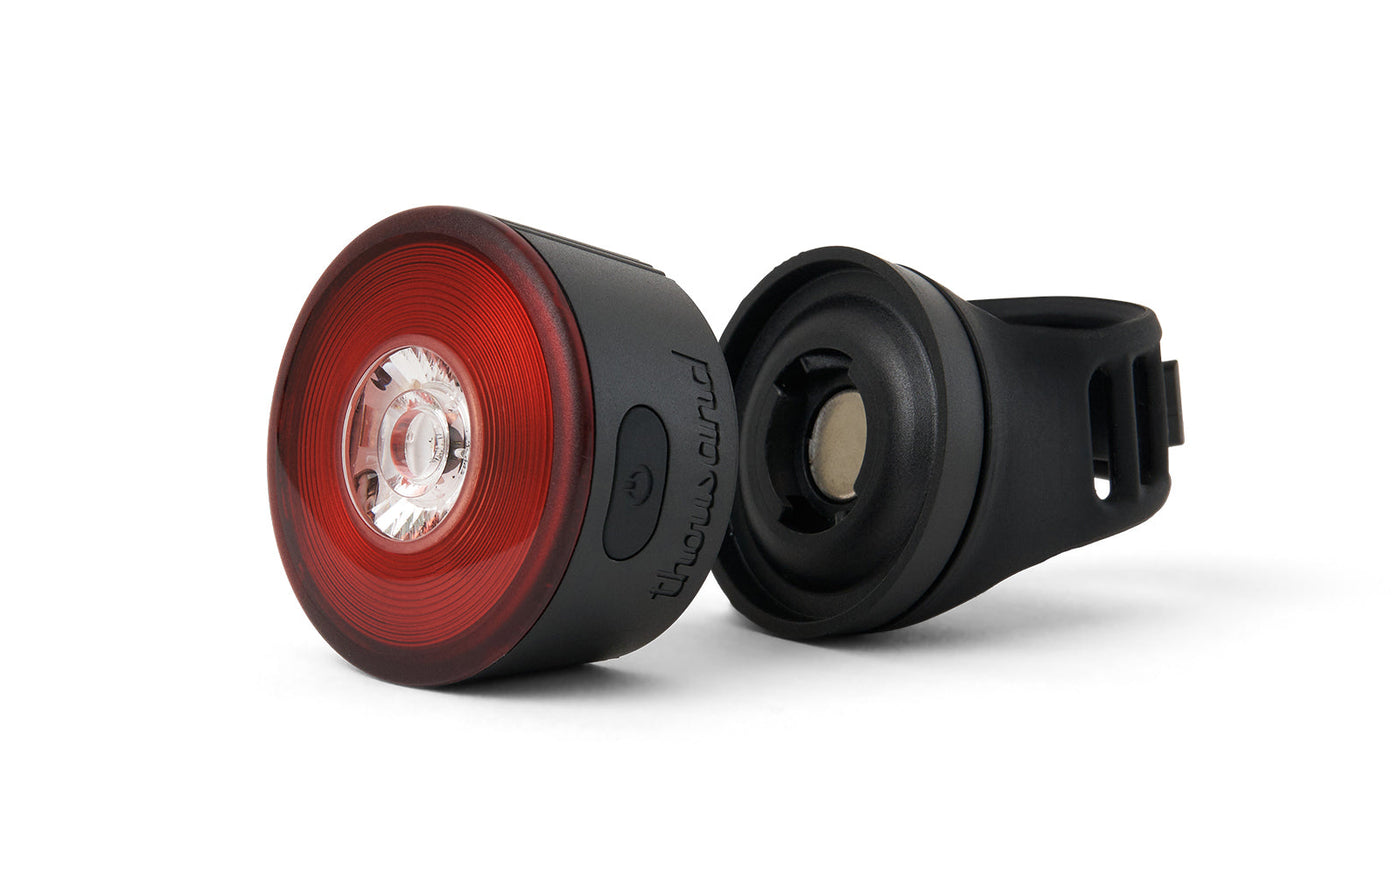 Traveler 2.0 Magnetic Bike Lights by Thousand